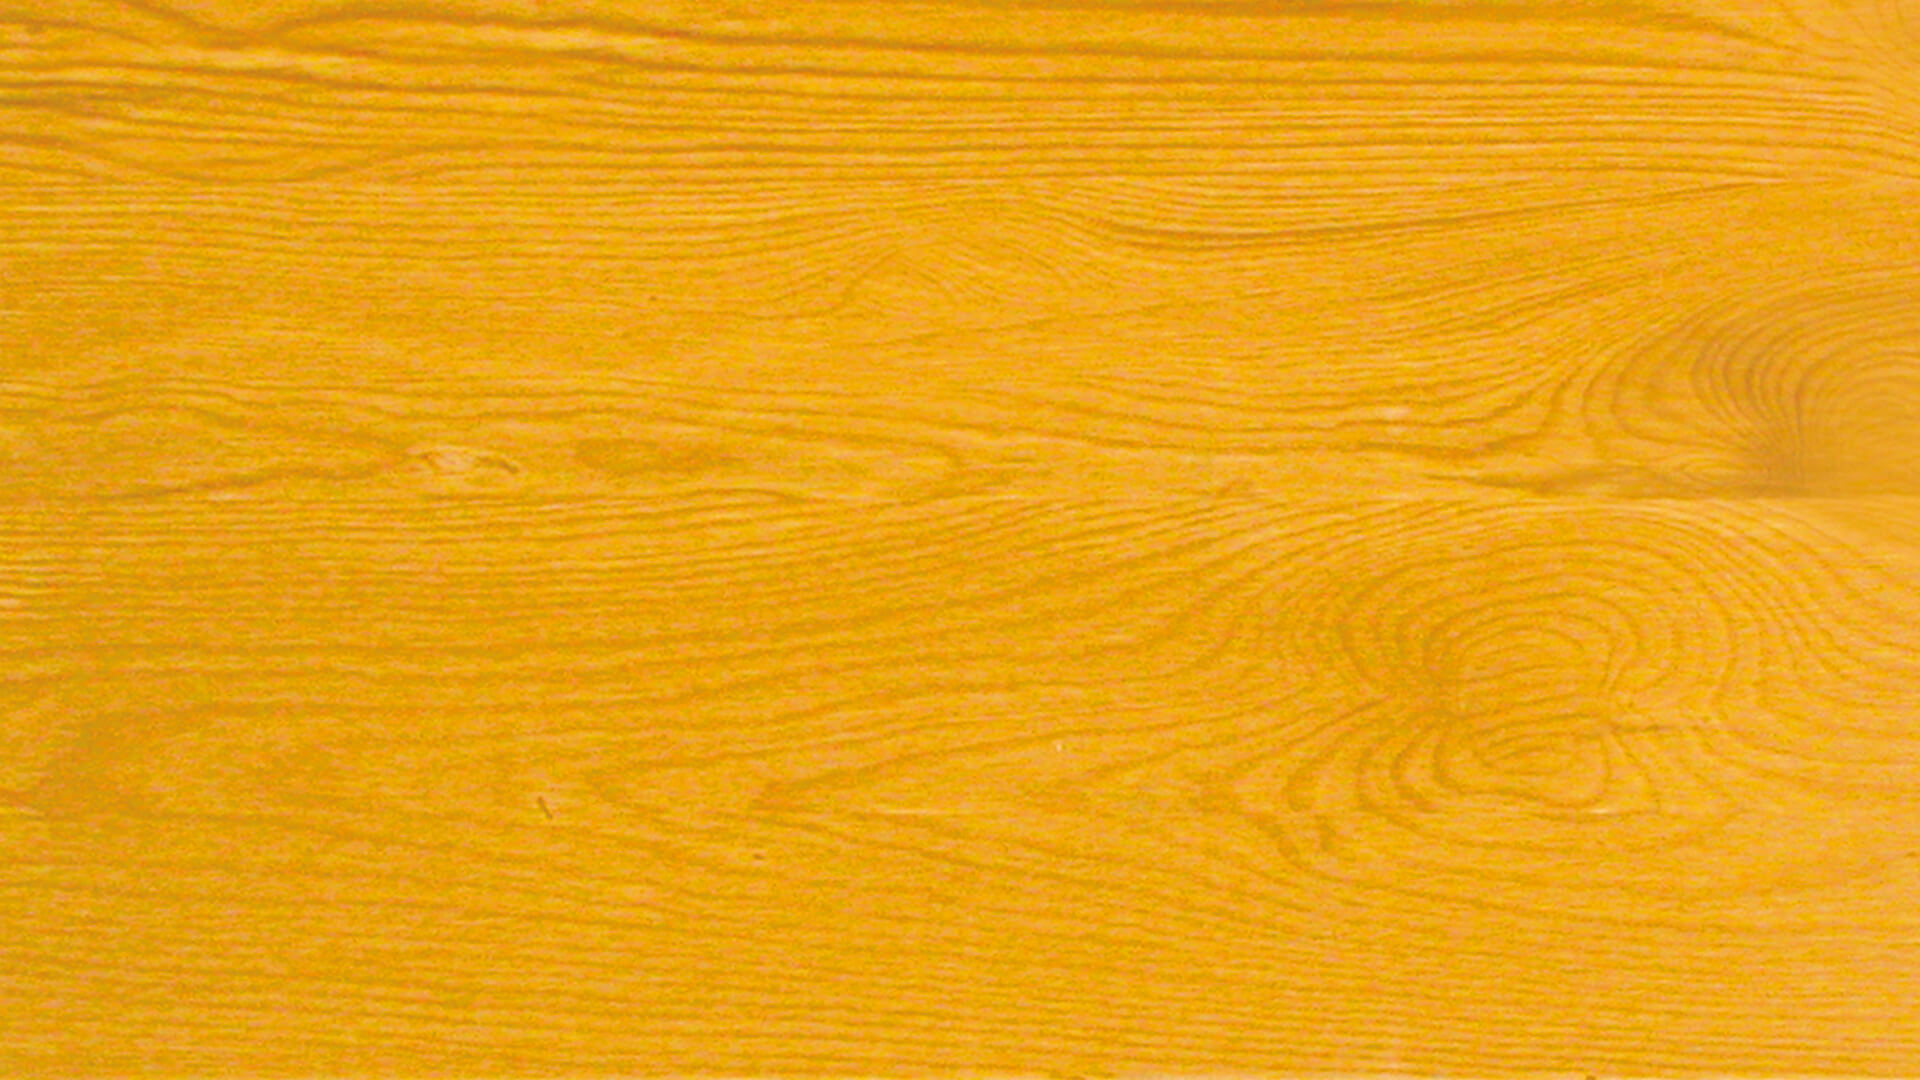 Wooden surface of beer garden table sets in ochre color